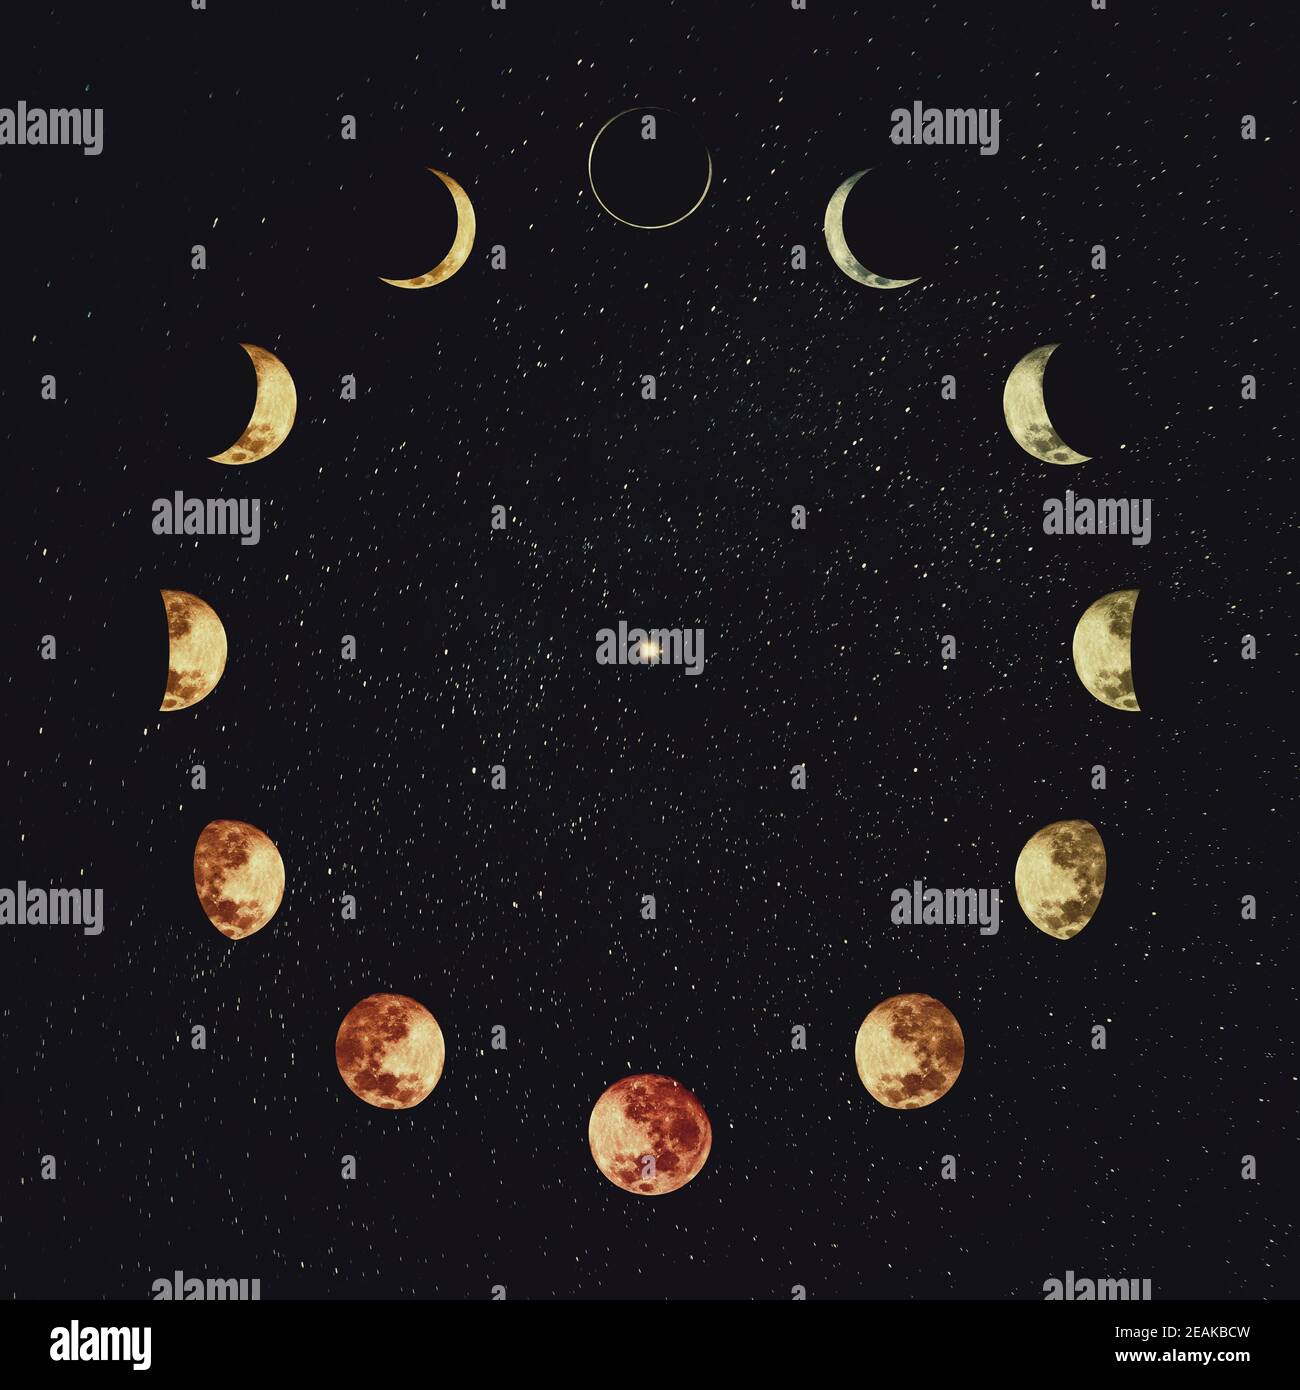 https://c8.alamy.com/comp/2EAKBCW/moon-phases-over-starry-night-sky-background-astronomy-and-astrology-conceptual-scene-esoteric-magic-celestial-signs-lunar-annual-calendar-symbol-for-12-months-or-minimalist-clock-shape-orbit-2EAKBCW.jpg